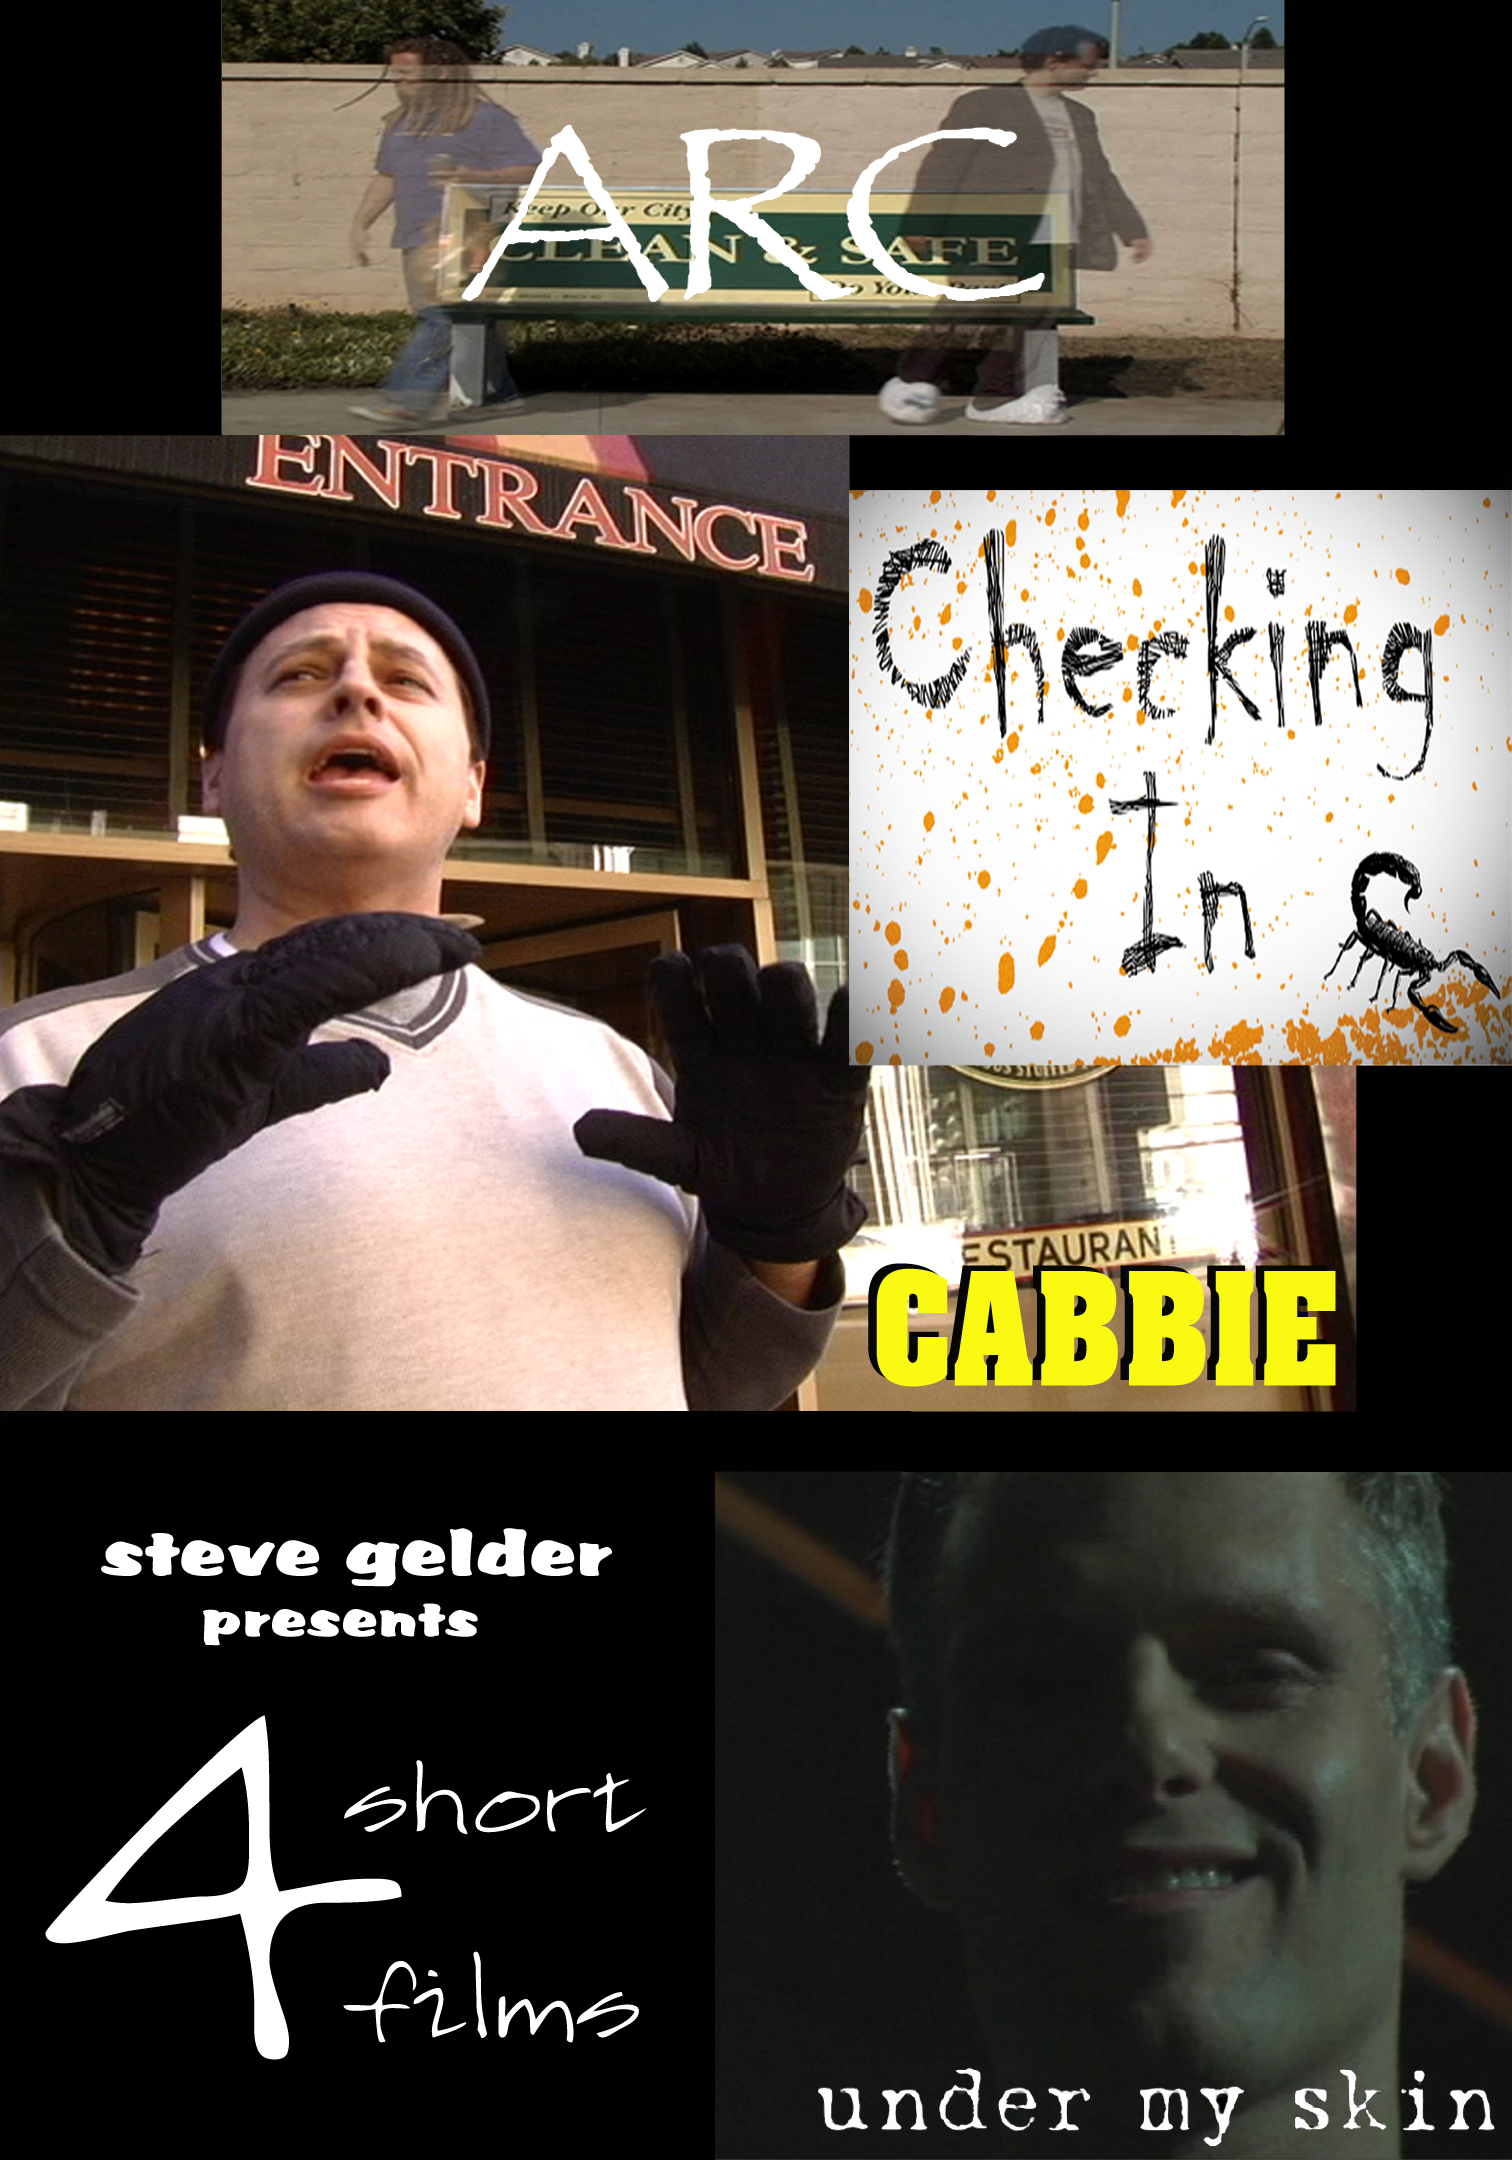 Cover of a compilation DVD of Steve Gelder's first four short film projects as actor, director and/or producer.